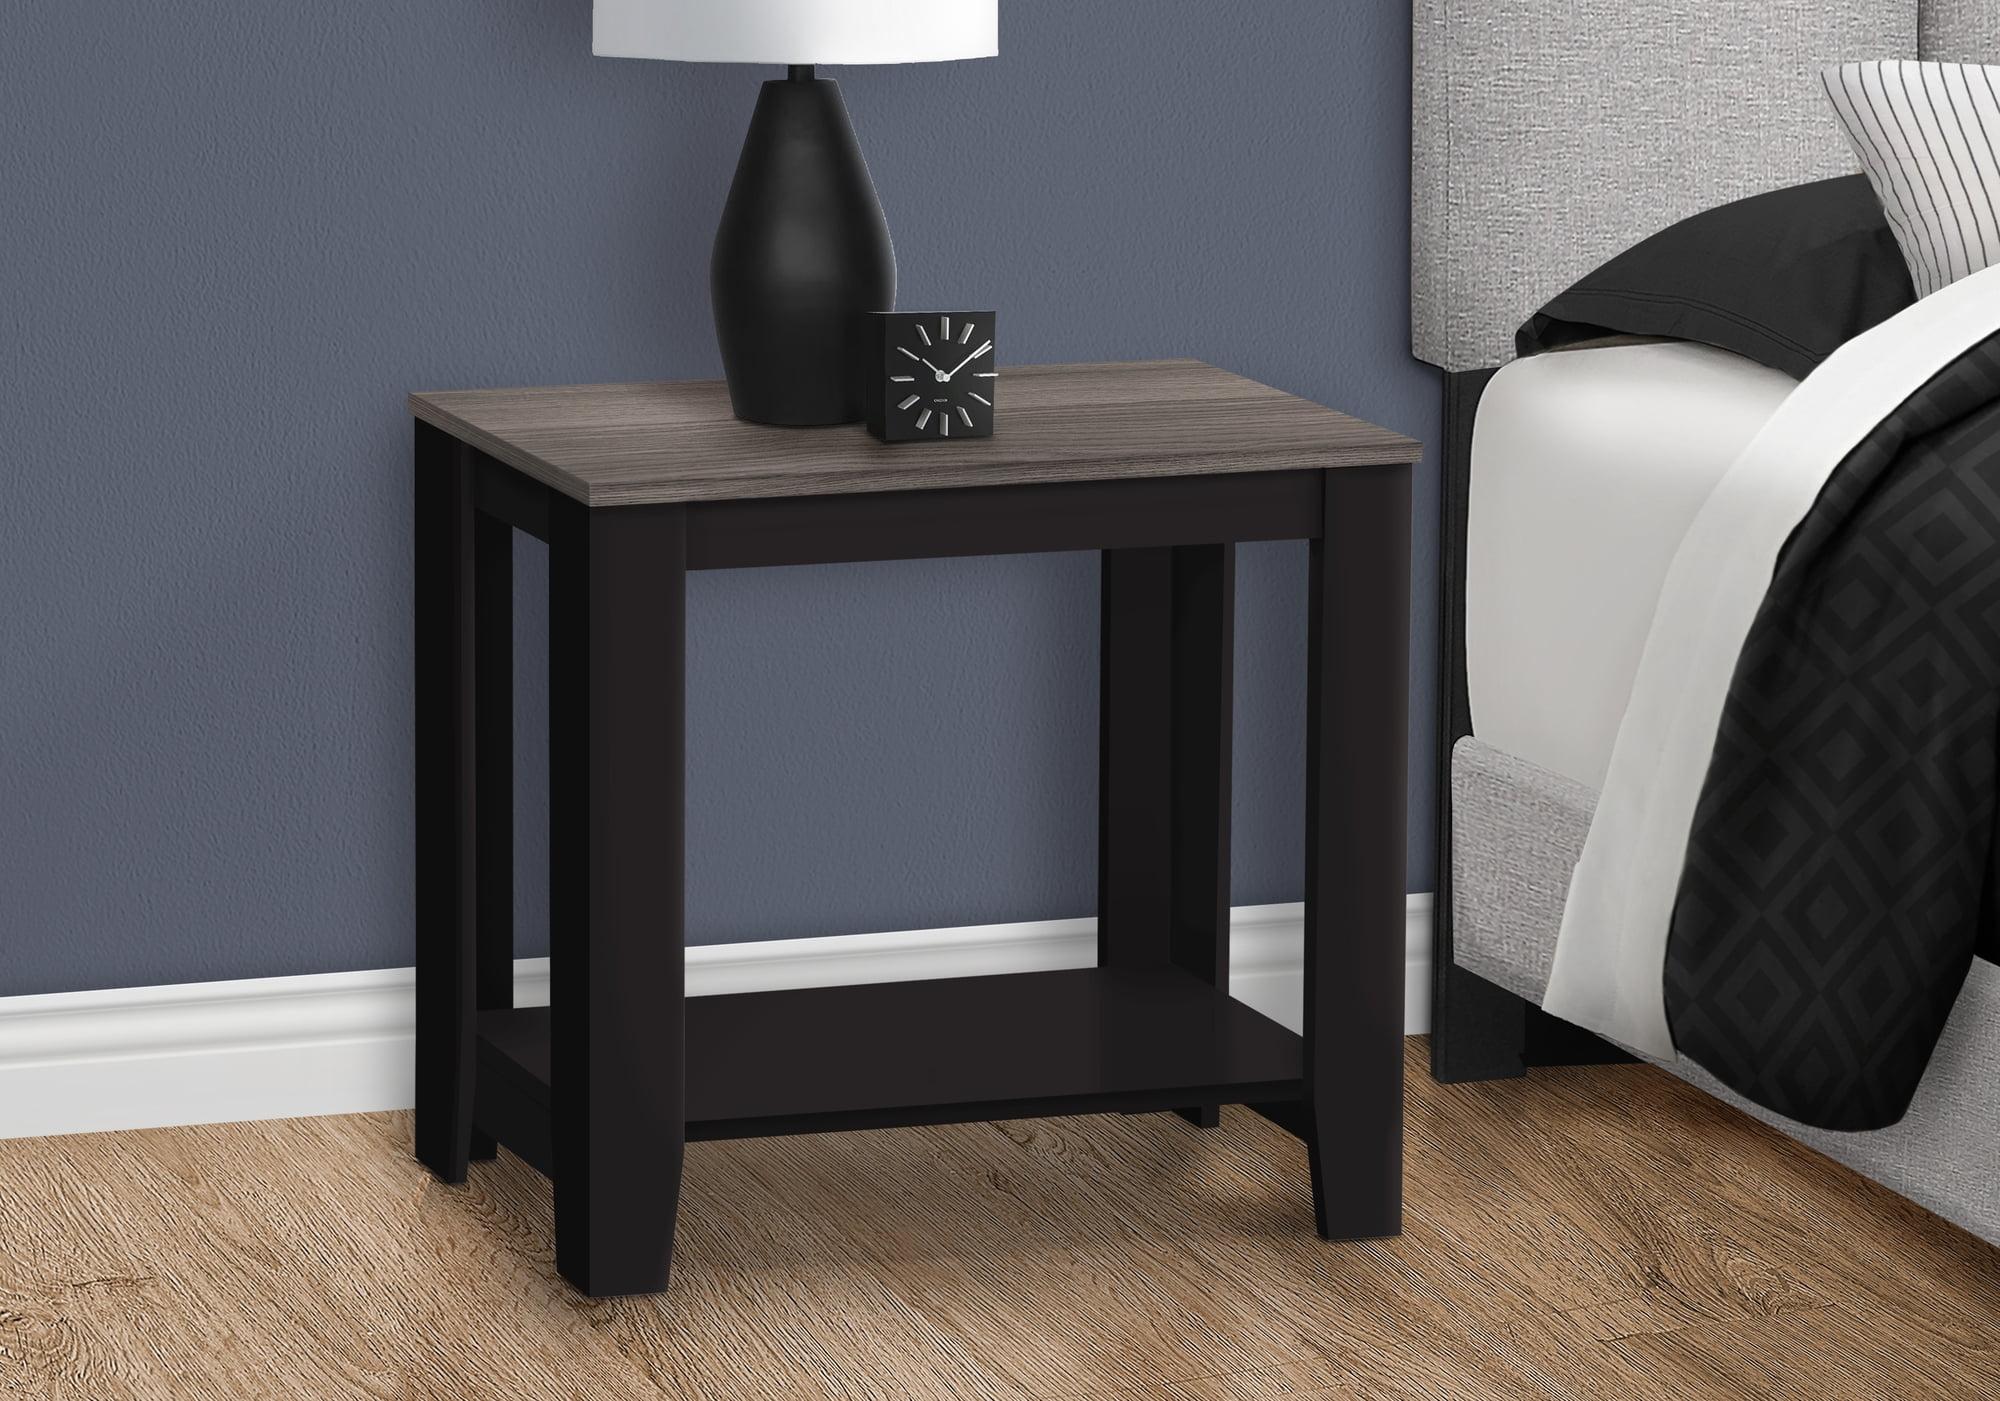 Chic Two-Tone Black and Gray Wood Grain Rectangular Side Table